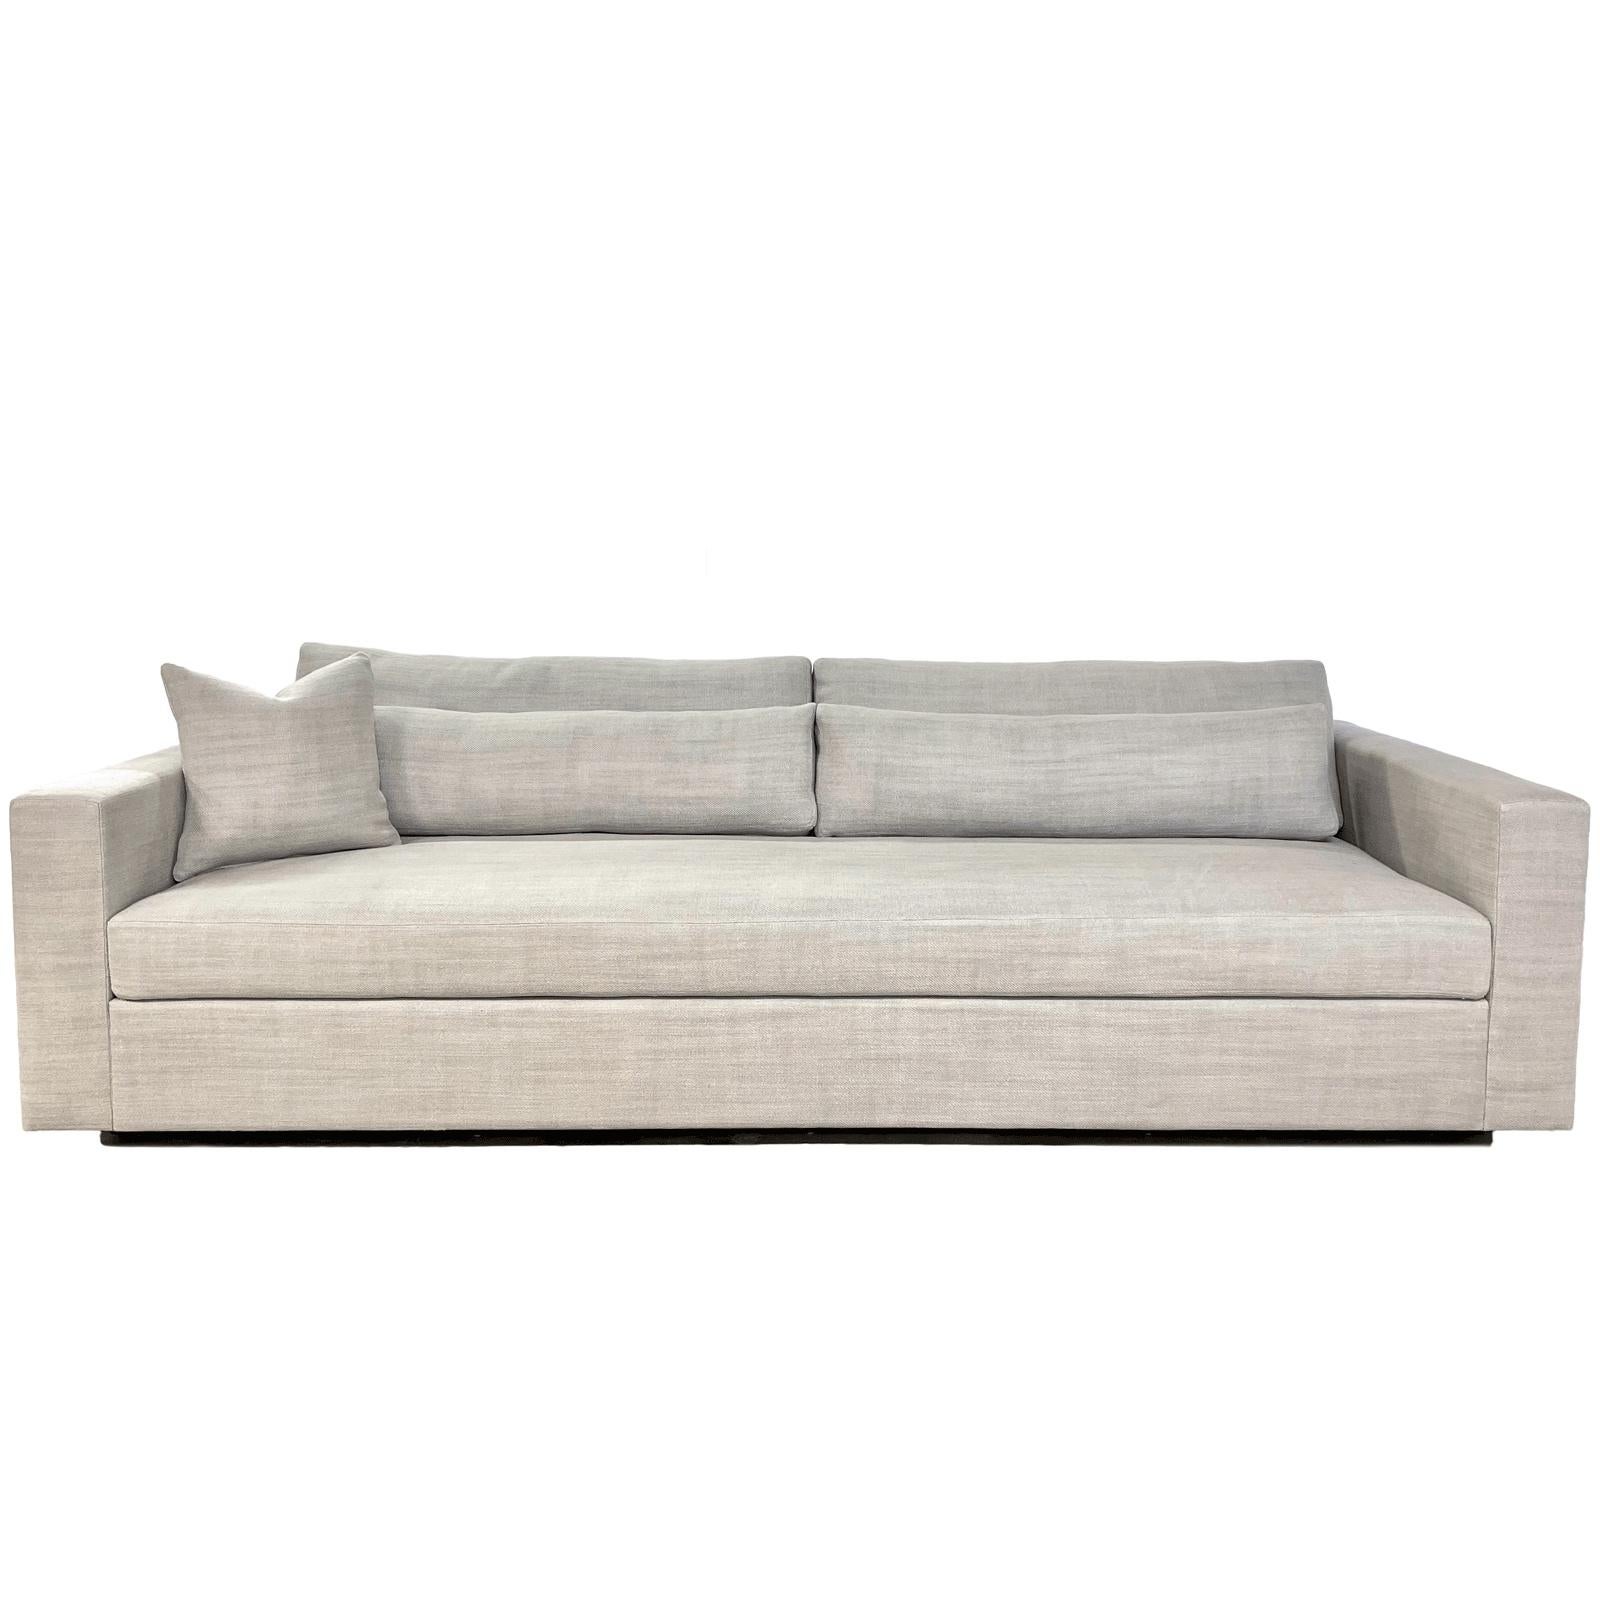 Not only is it Stunning and versatile it is quite possibly the most comfortable sofa available. This Dawkins Best-Seller style is available at 6', 7', 8', 9', and 10' lengths. Sleeper versions available as well a custom sizes.